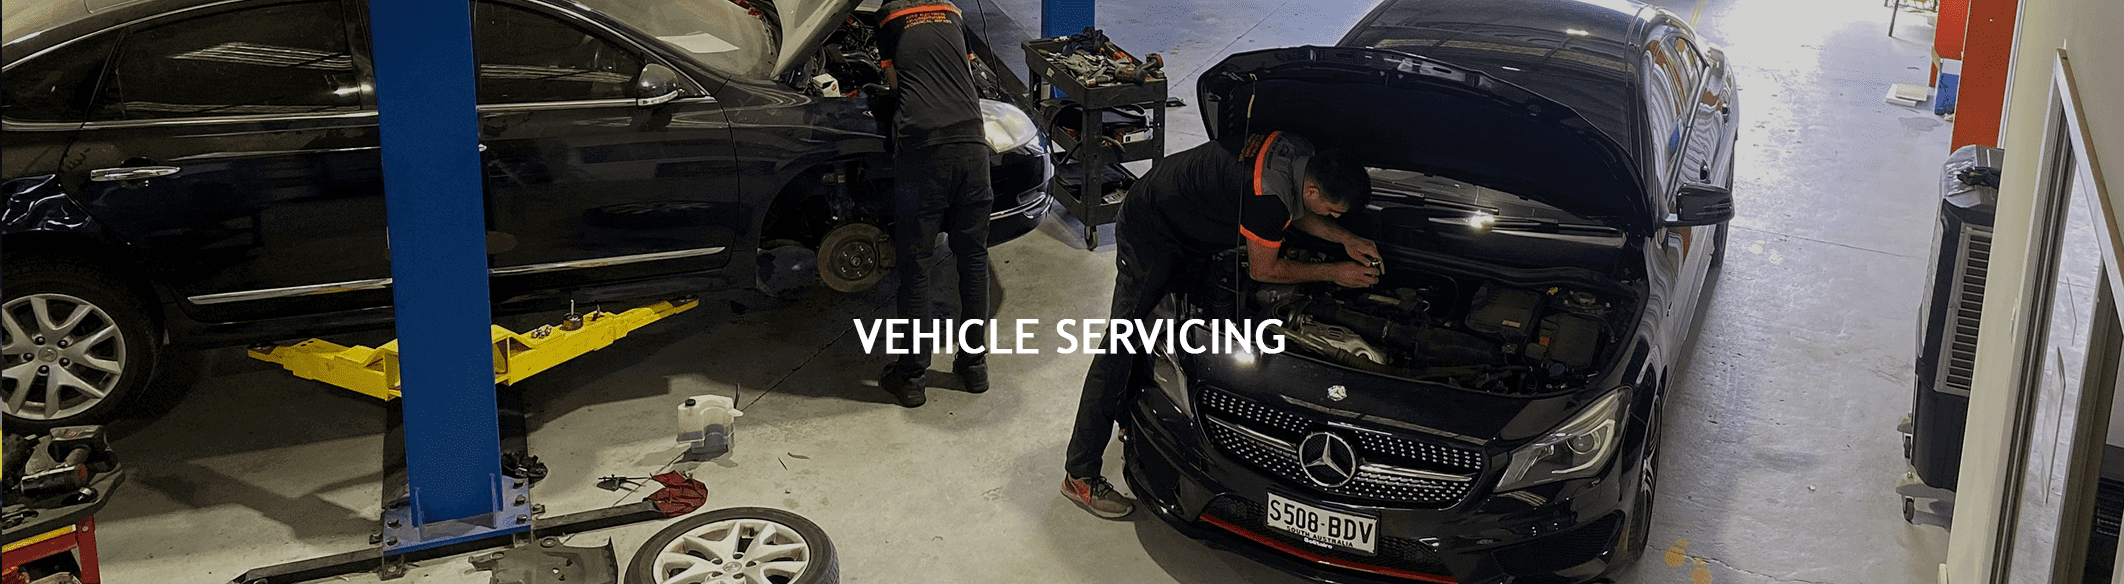 Car Service In Adelaide